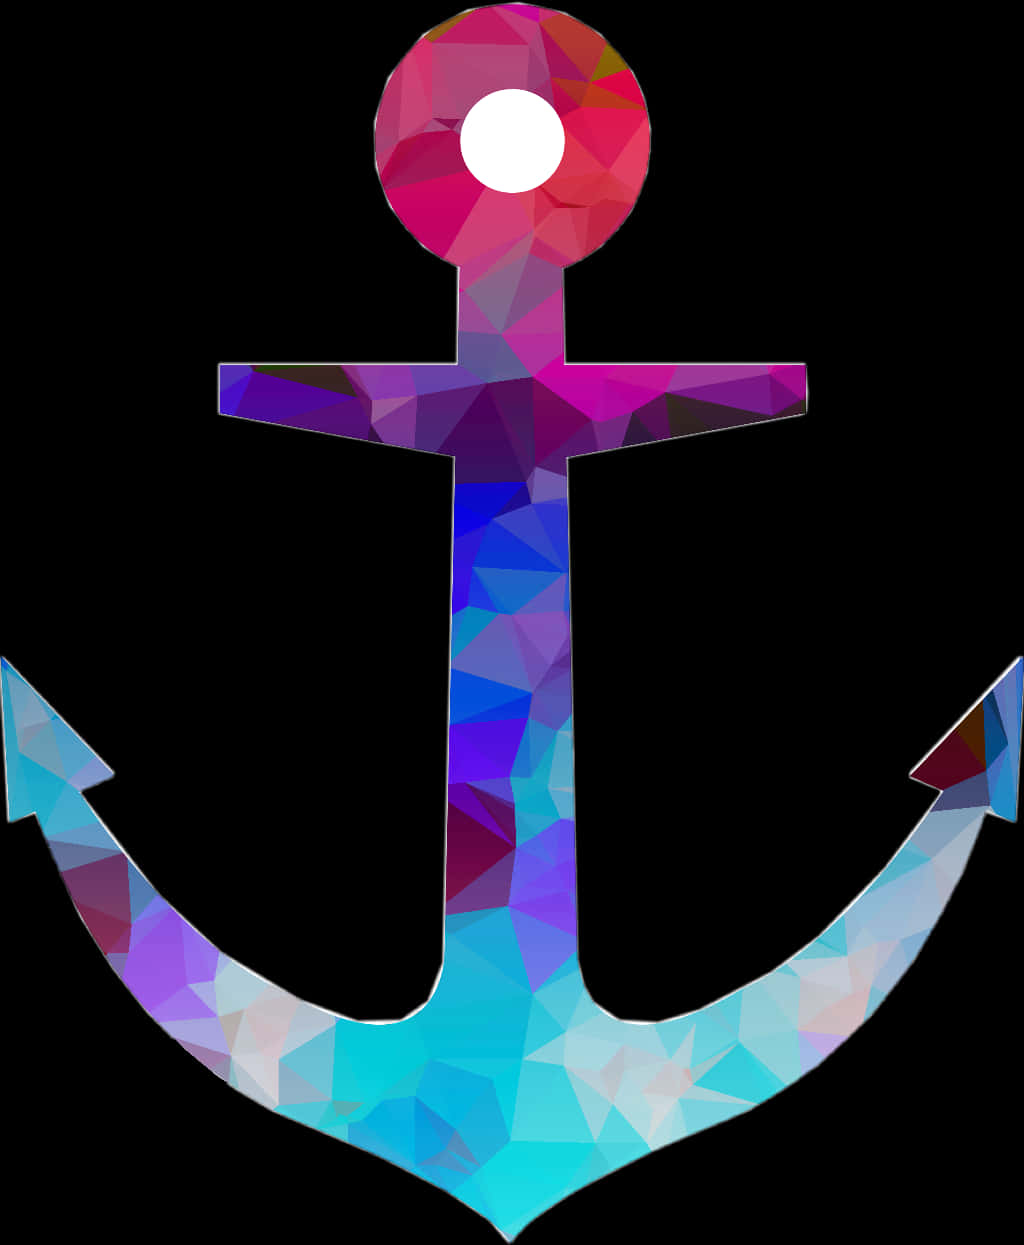 A Colorful Anchor With A Black Background